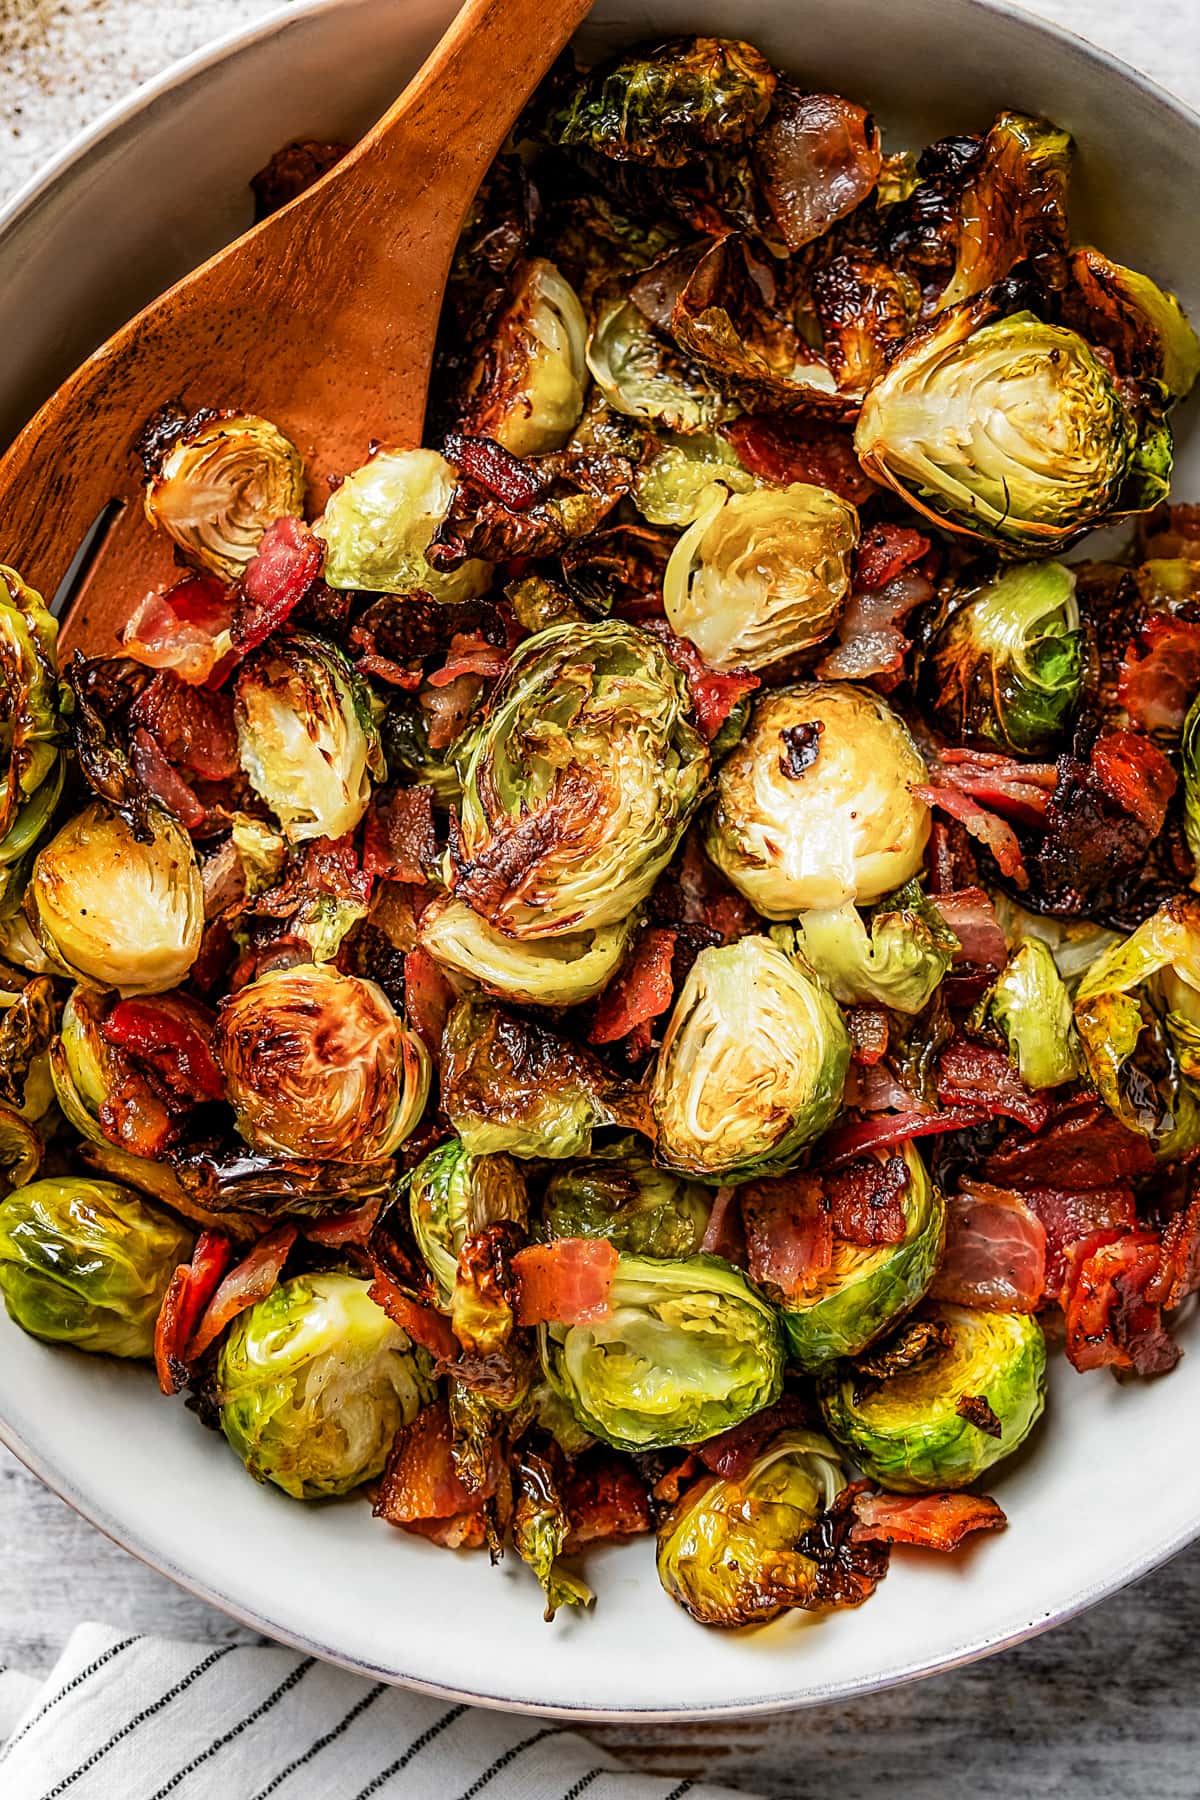 Scooping roasted Brussels sprouts and bacon from a serving bowl with a wooden serving fork.